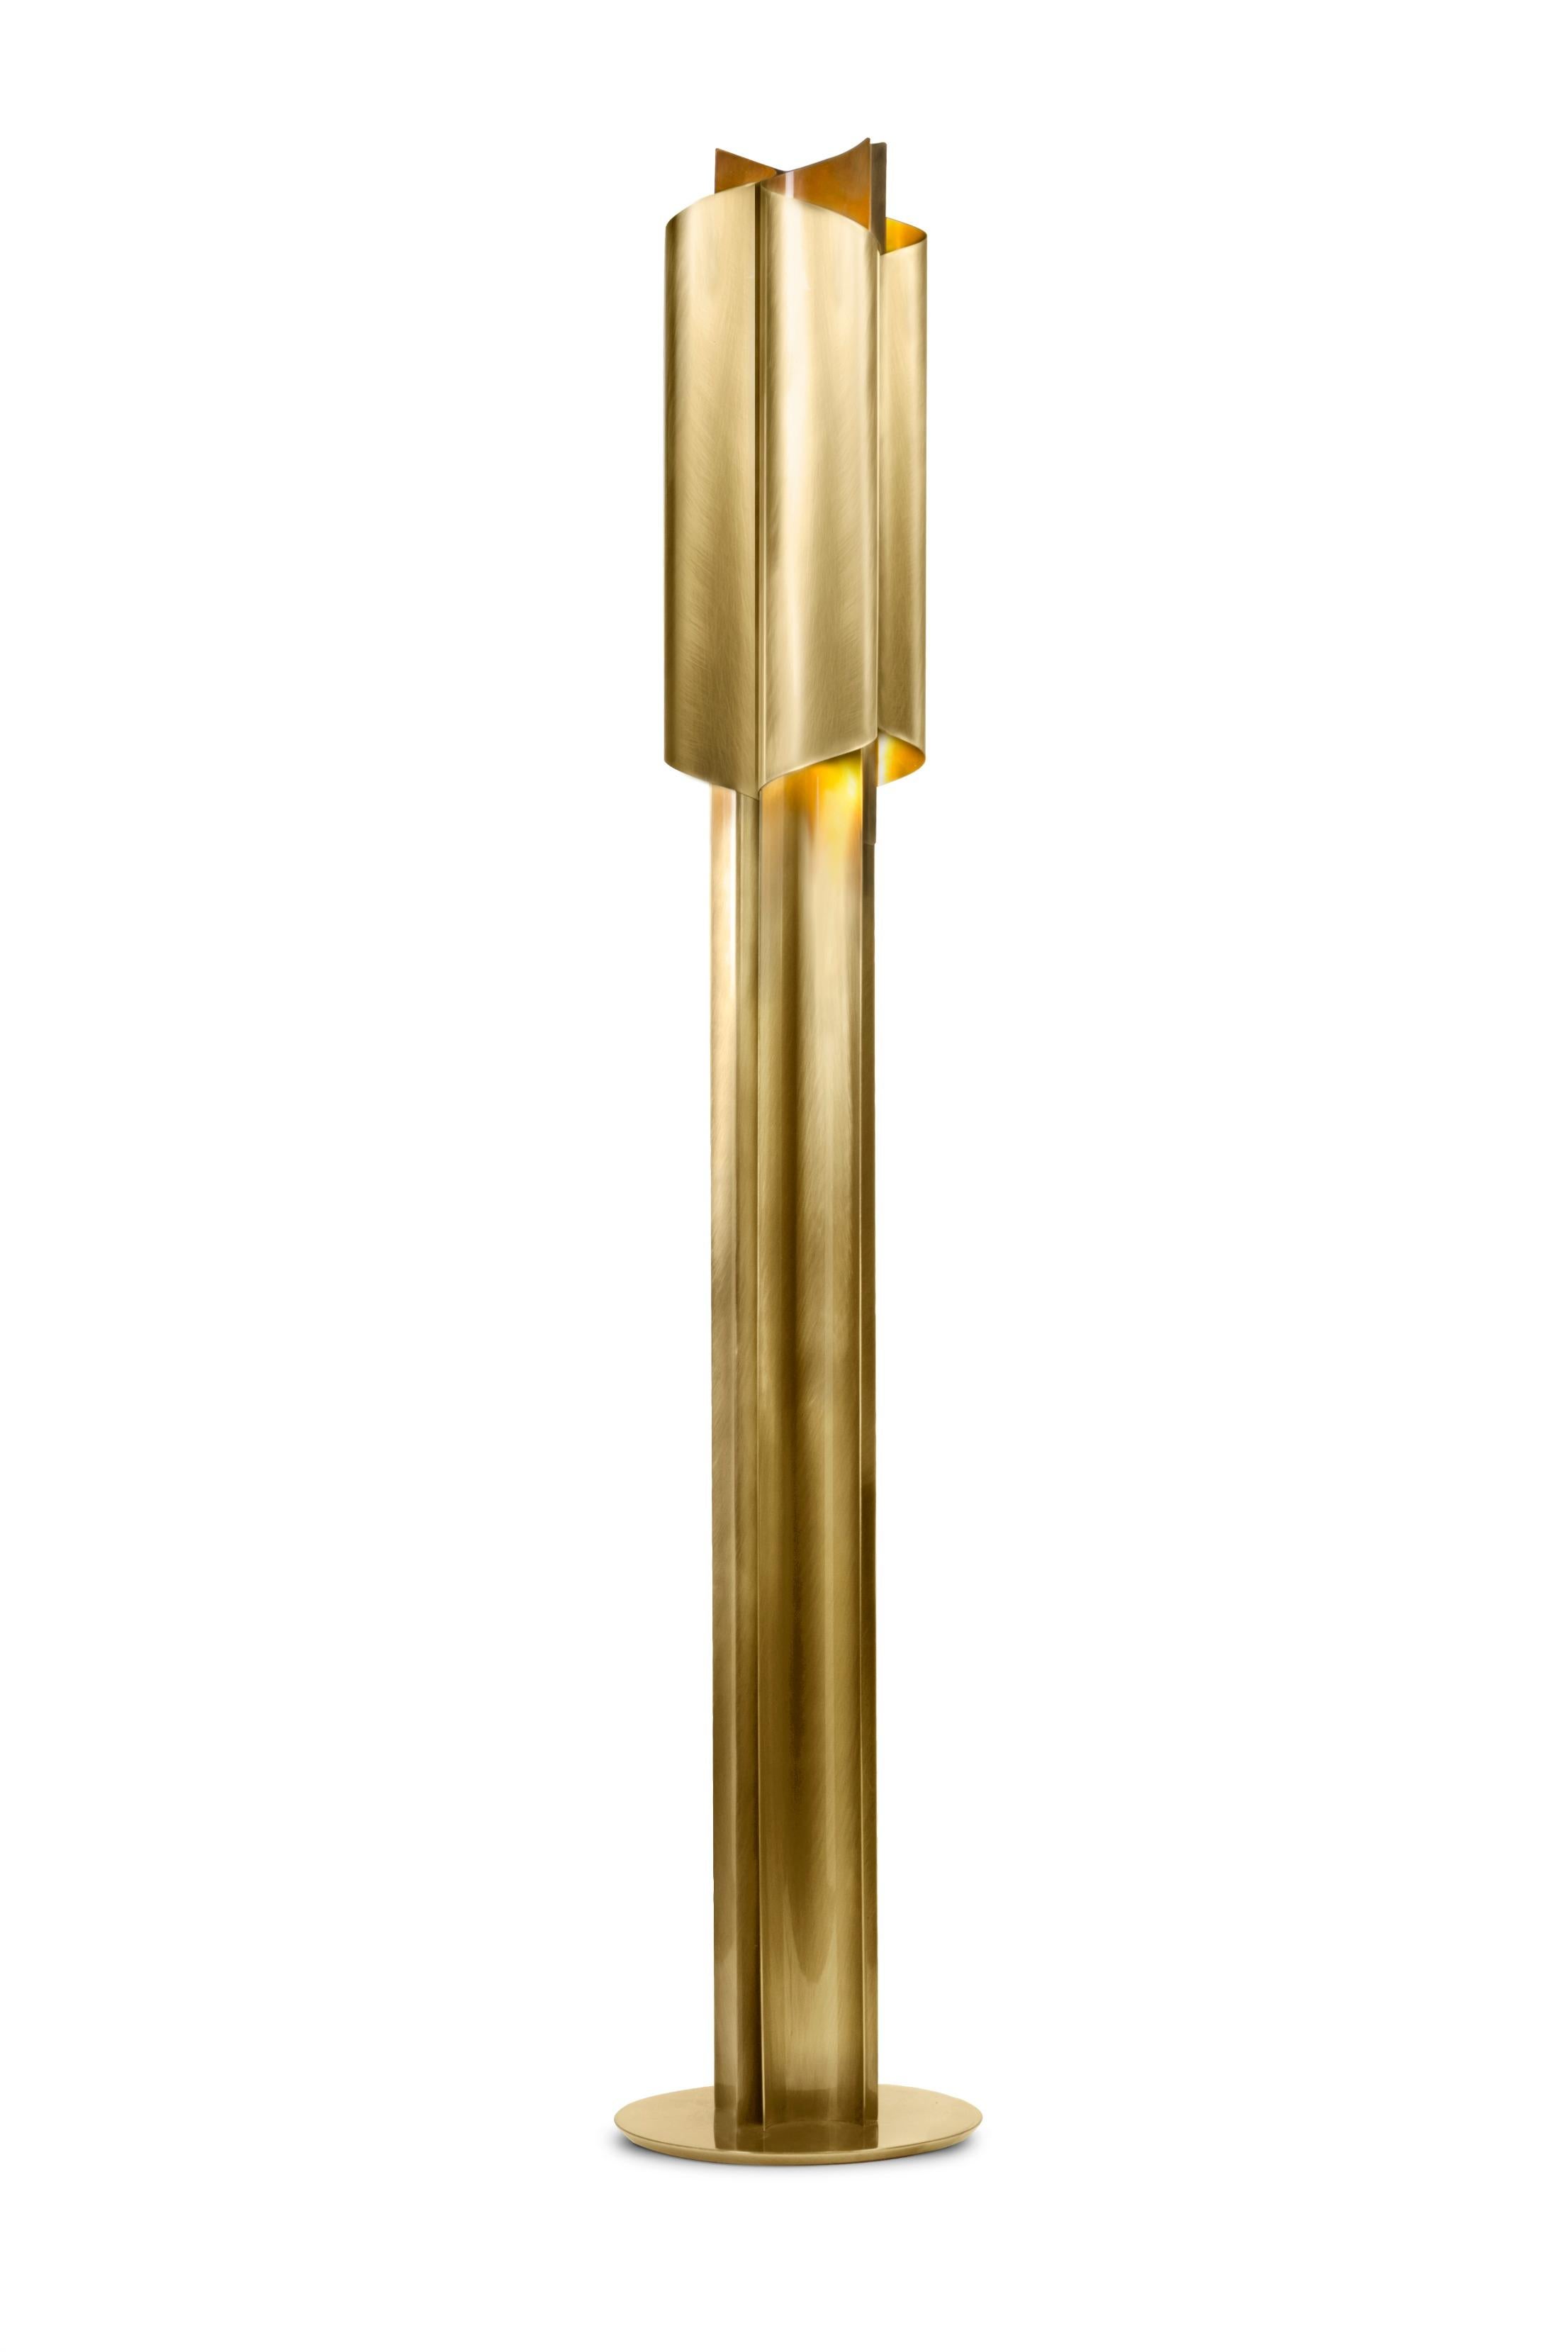 Contemporary Cyrus Floor Lamp in Polished Brass by Brabbu For Sale